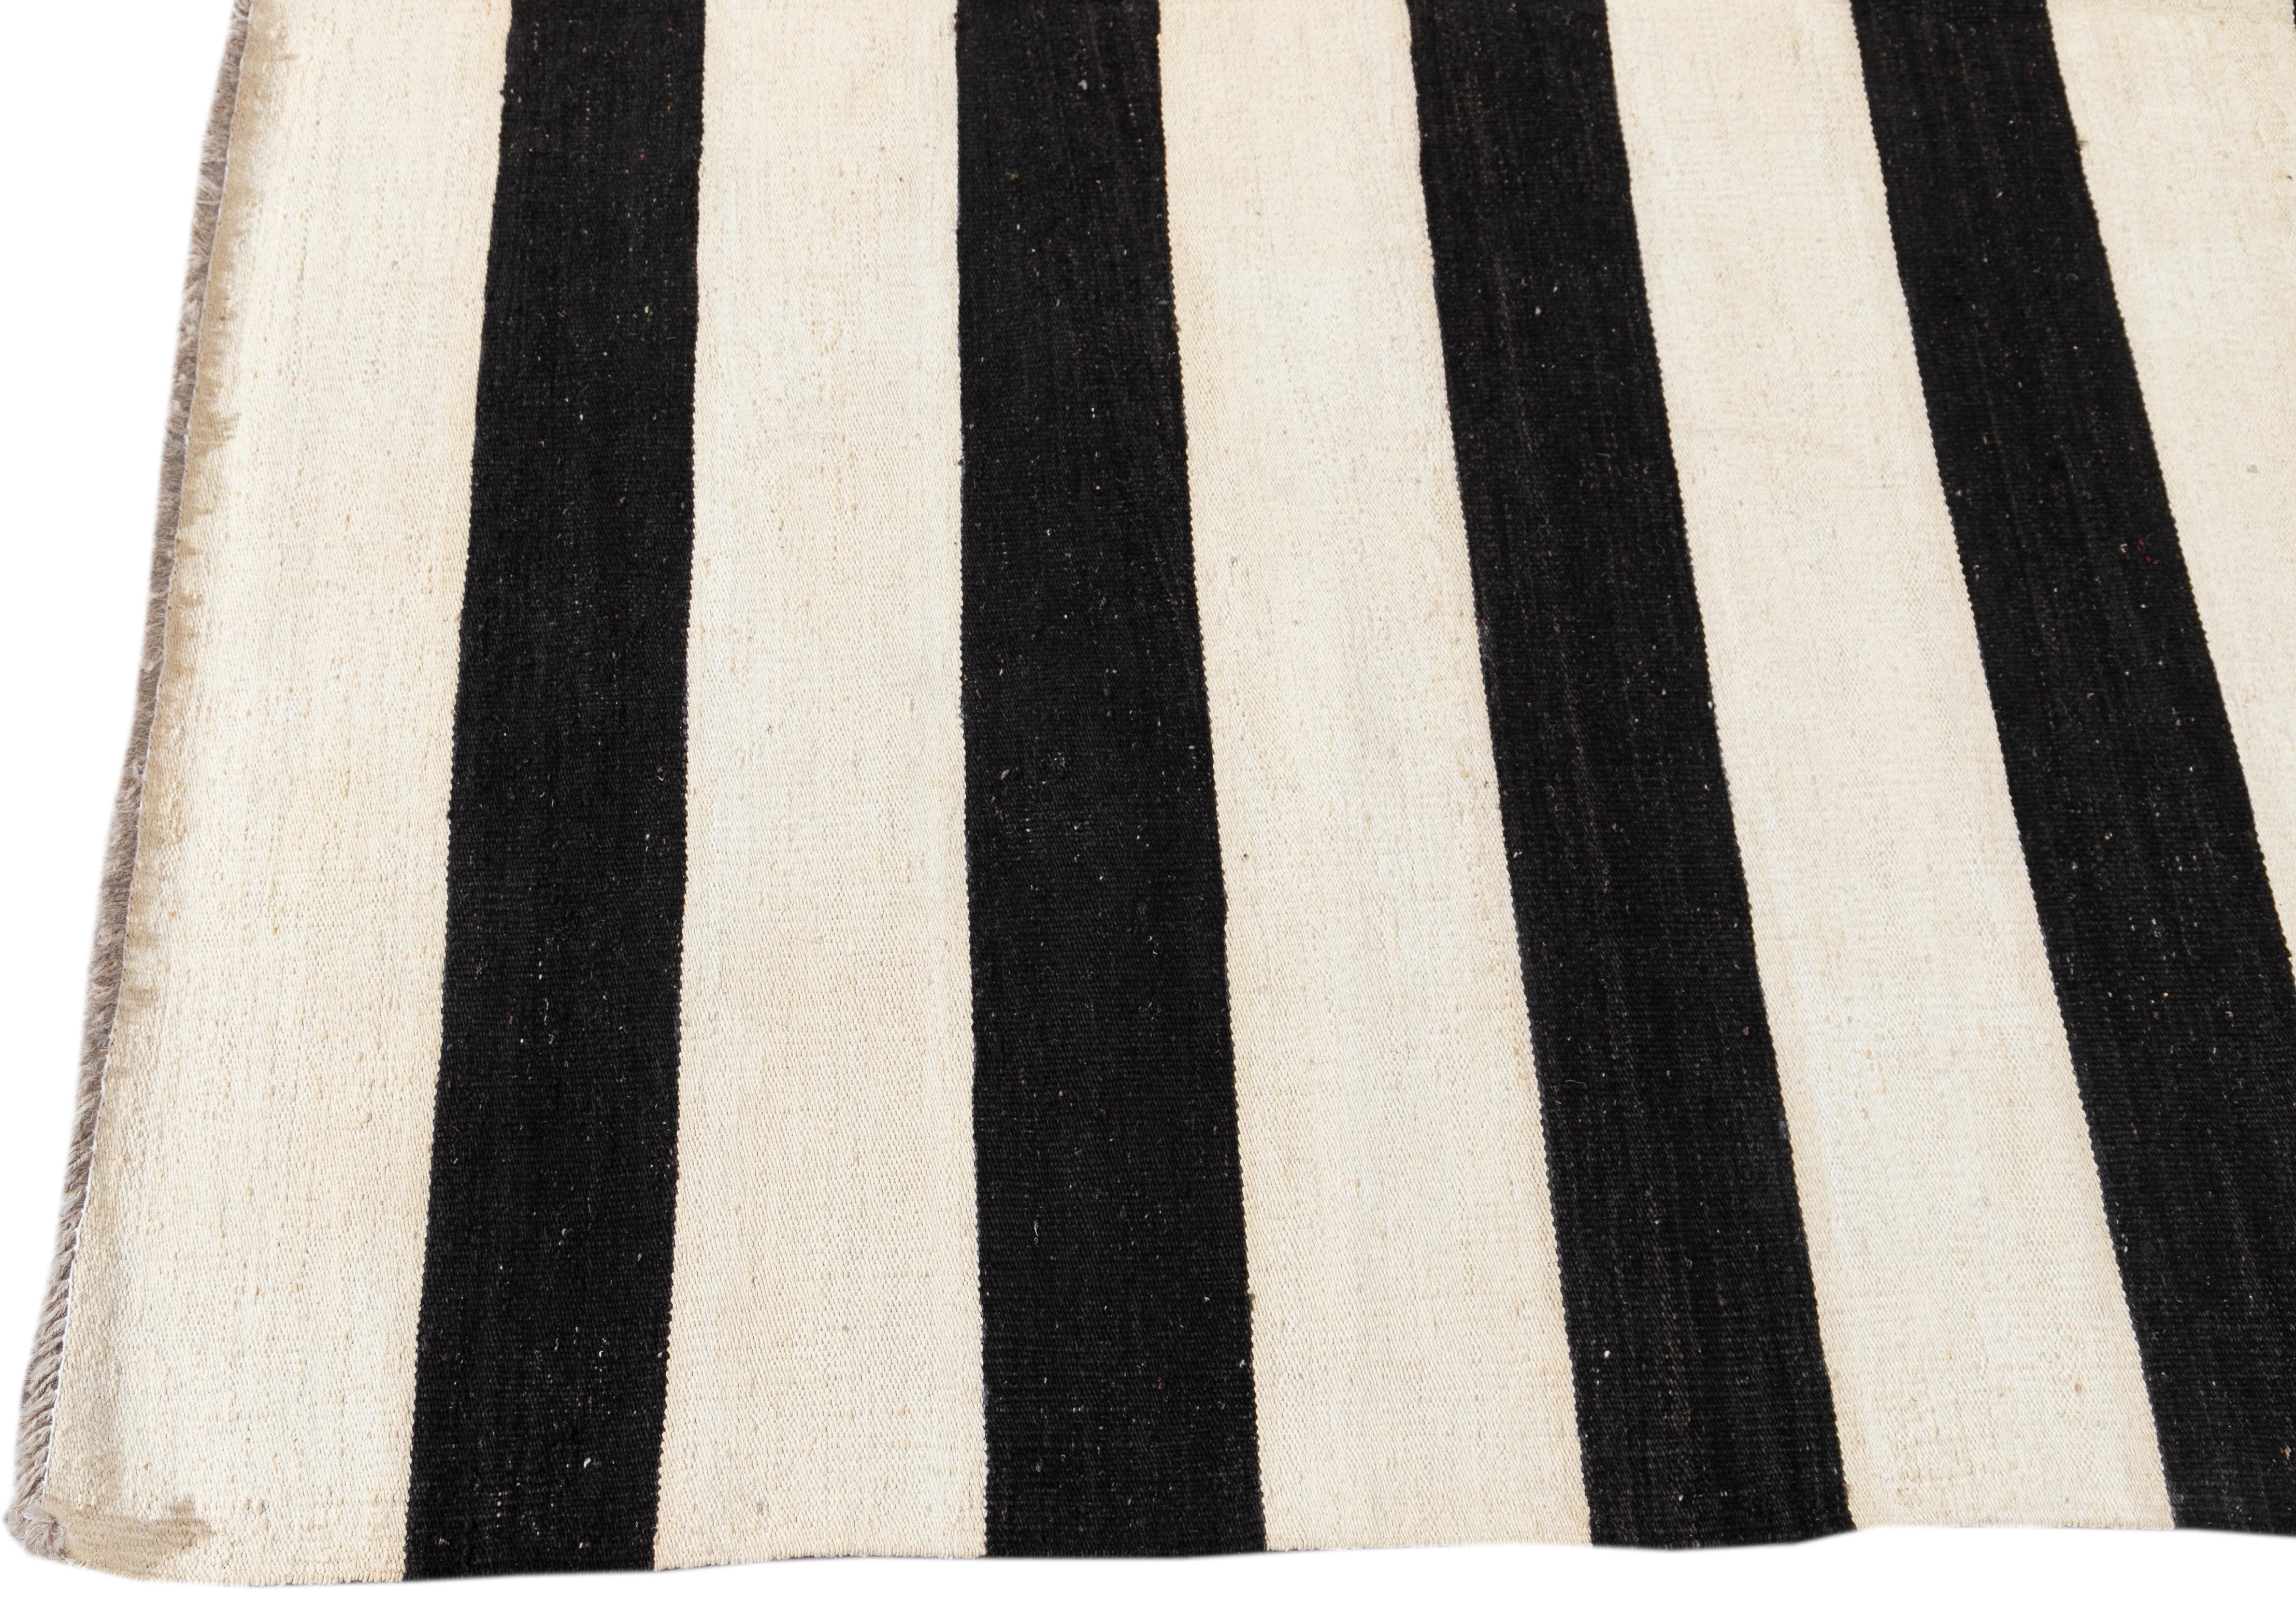 Contemporary Modern Kilim Black And White Flatweave Wool Rug With Striped Design For Sale